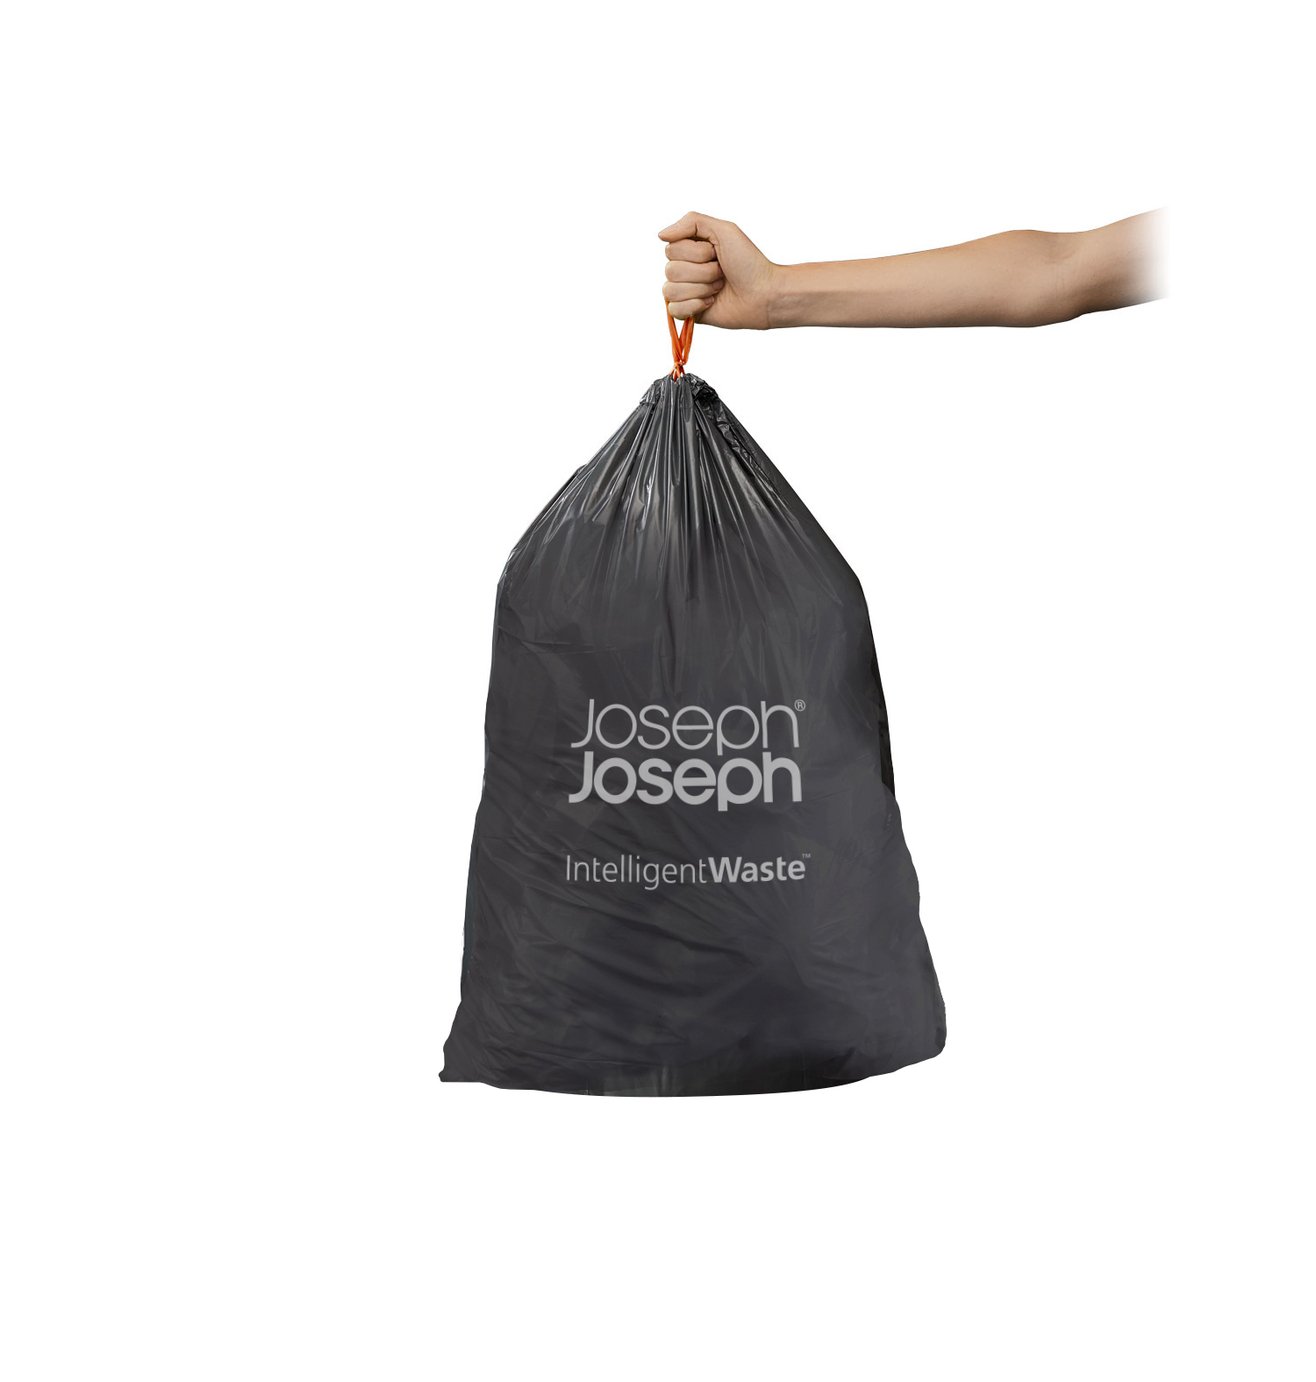 Joseph Joseph IW6 30 Litre Extra Strong Bin Bags -Pack of 20 Review